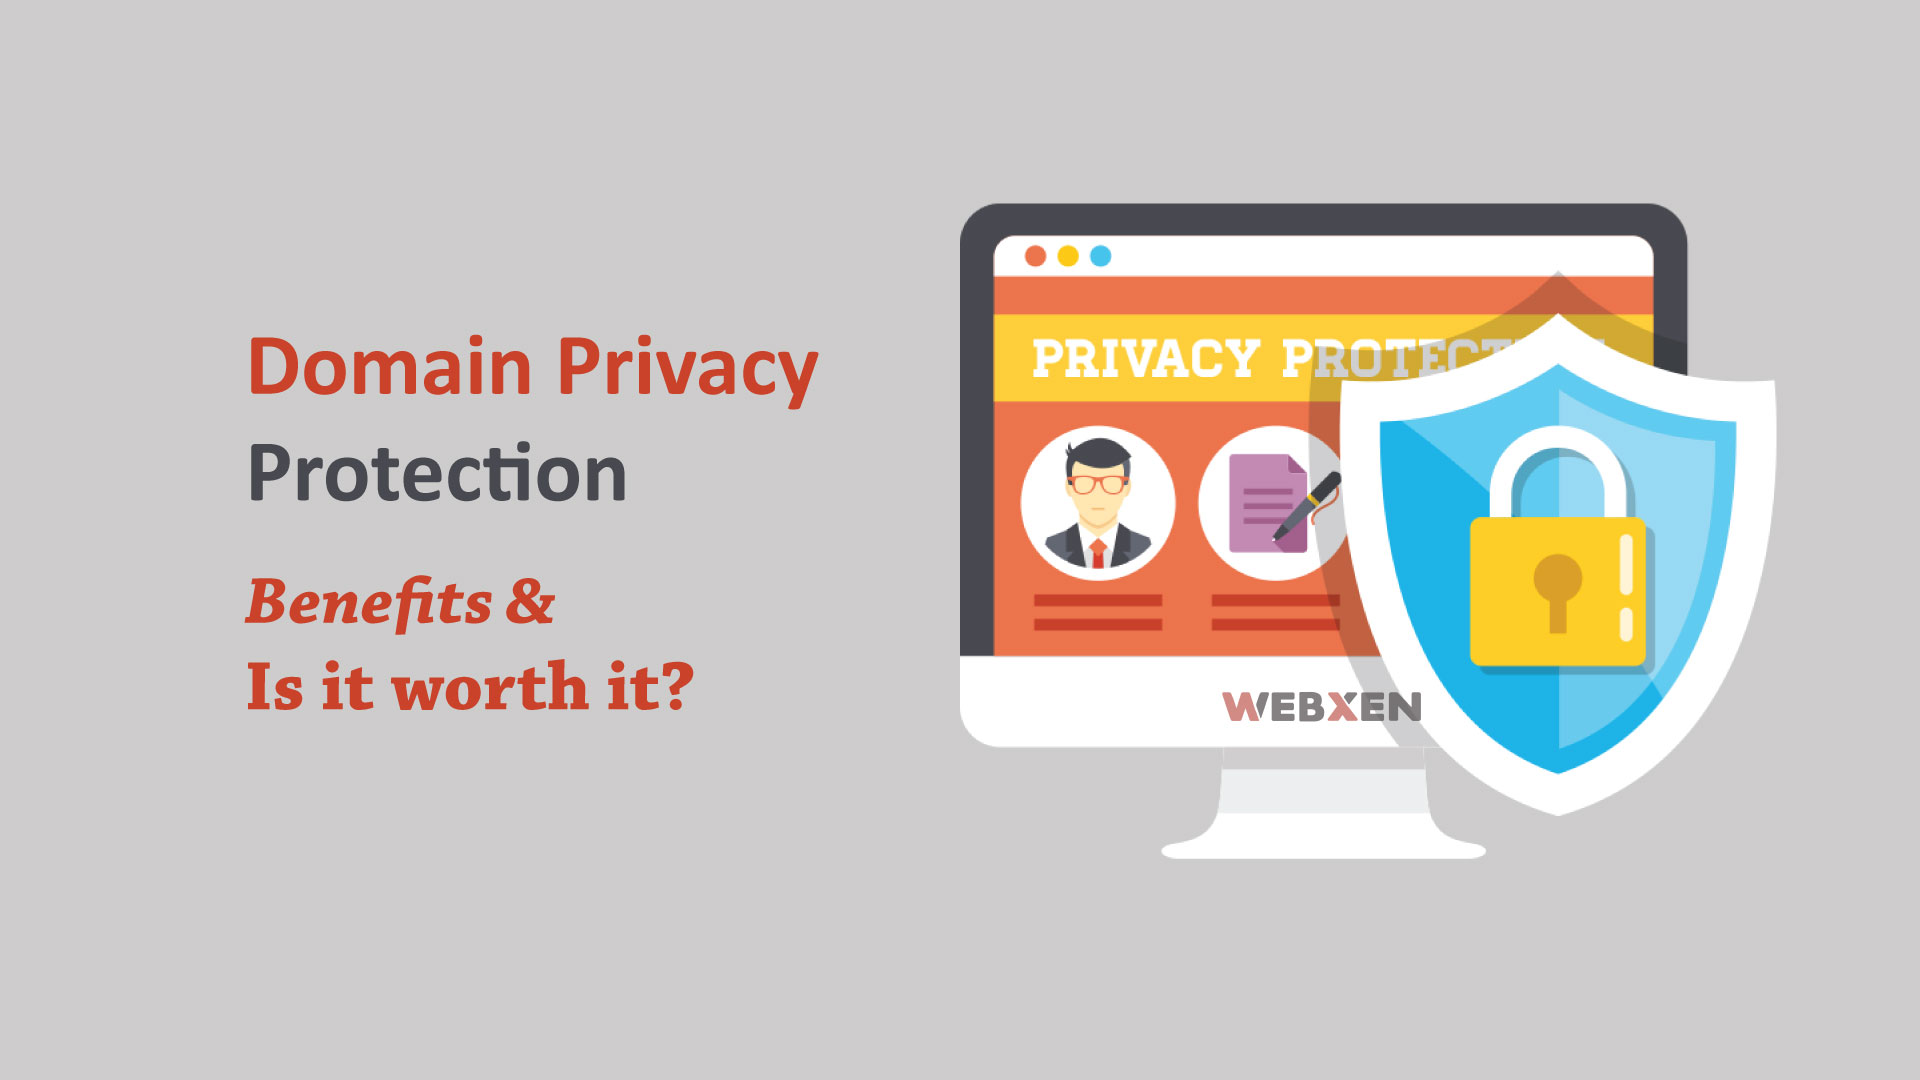 Domain Privacy Protection and its Benefits